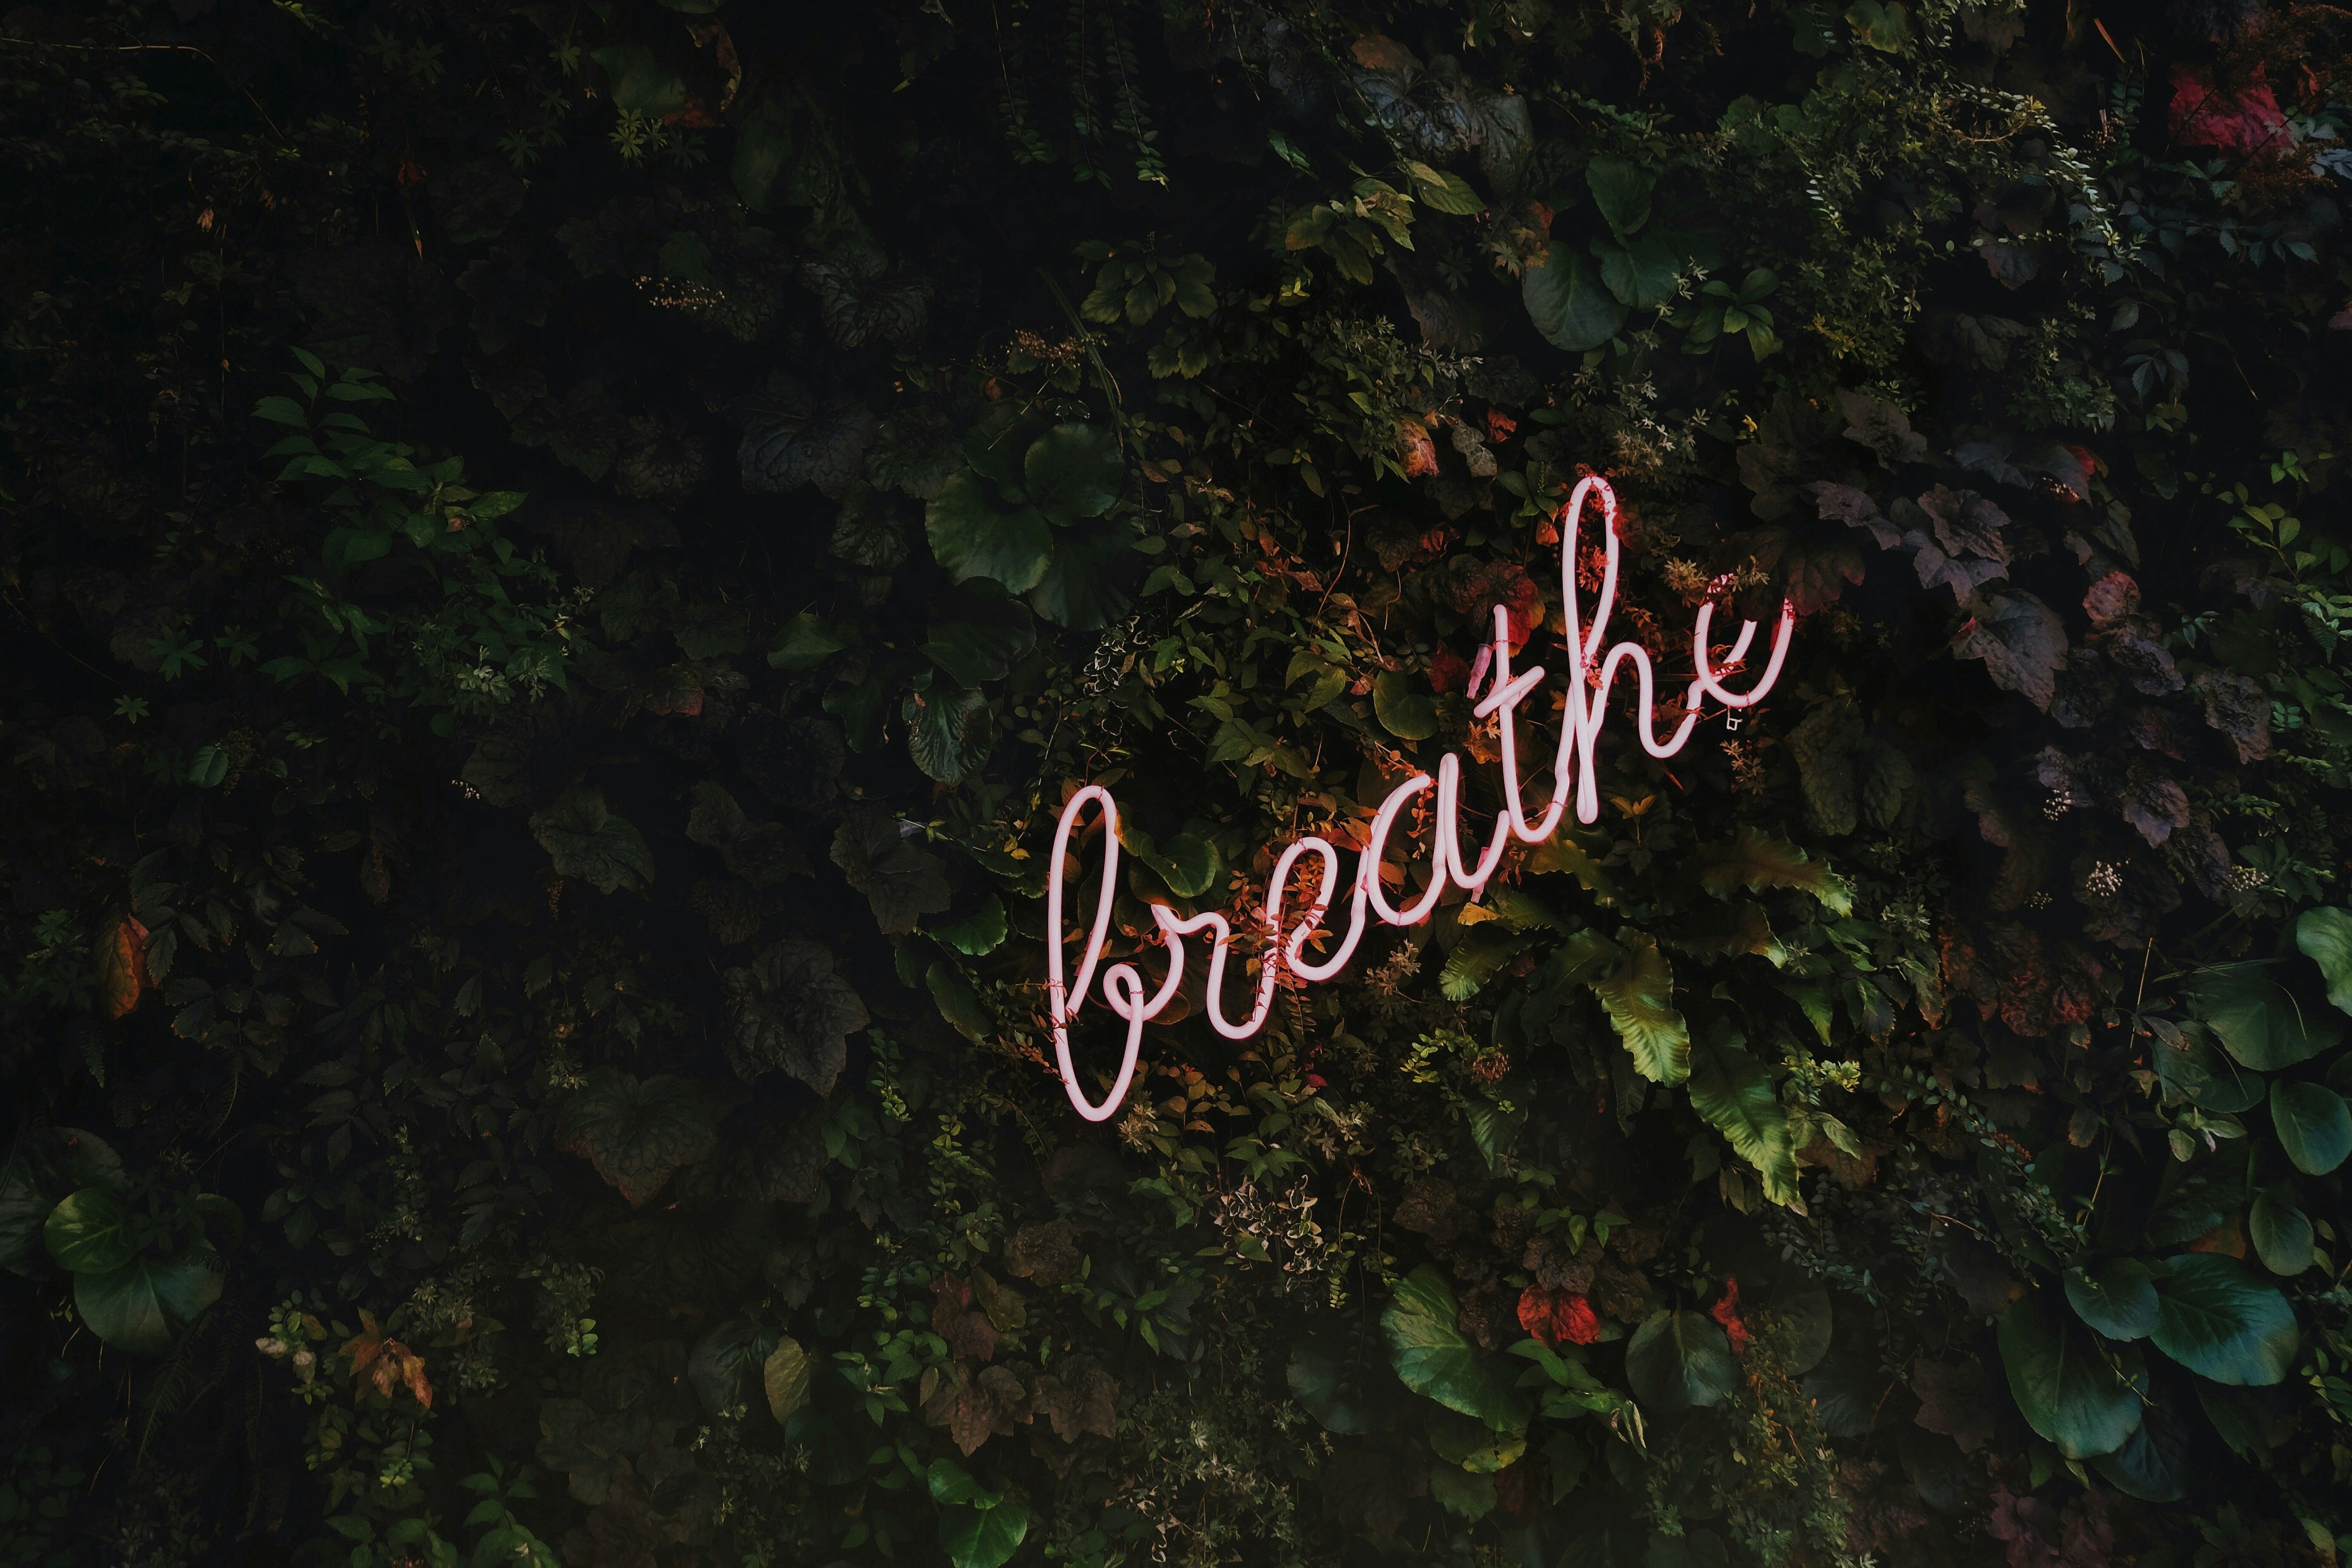 …breathe!</p>
<p>For a full size digital copy (6000x4000px RAW+JPG) of this file, or a high quality print, please contact me via instagram: @timothy.j.goedhart, or email: tim@goedhart-lin.nl</p>
<p>That file would be free to use for any means except direct reselling (copywrite is included in metadata).</p>
<p>When using this free image online: please tag, credit and if you want, follow me on Instagram.” style=”max-width:400px;float:left;padding:10px 10px 10px 0px;border:0px;”></p>
<div class=